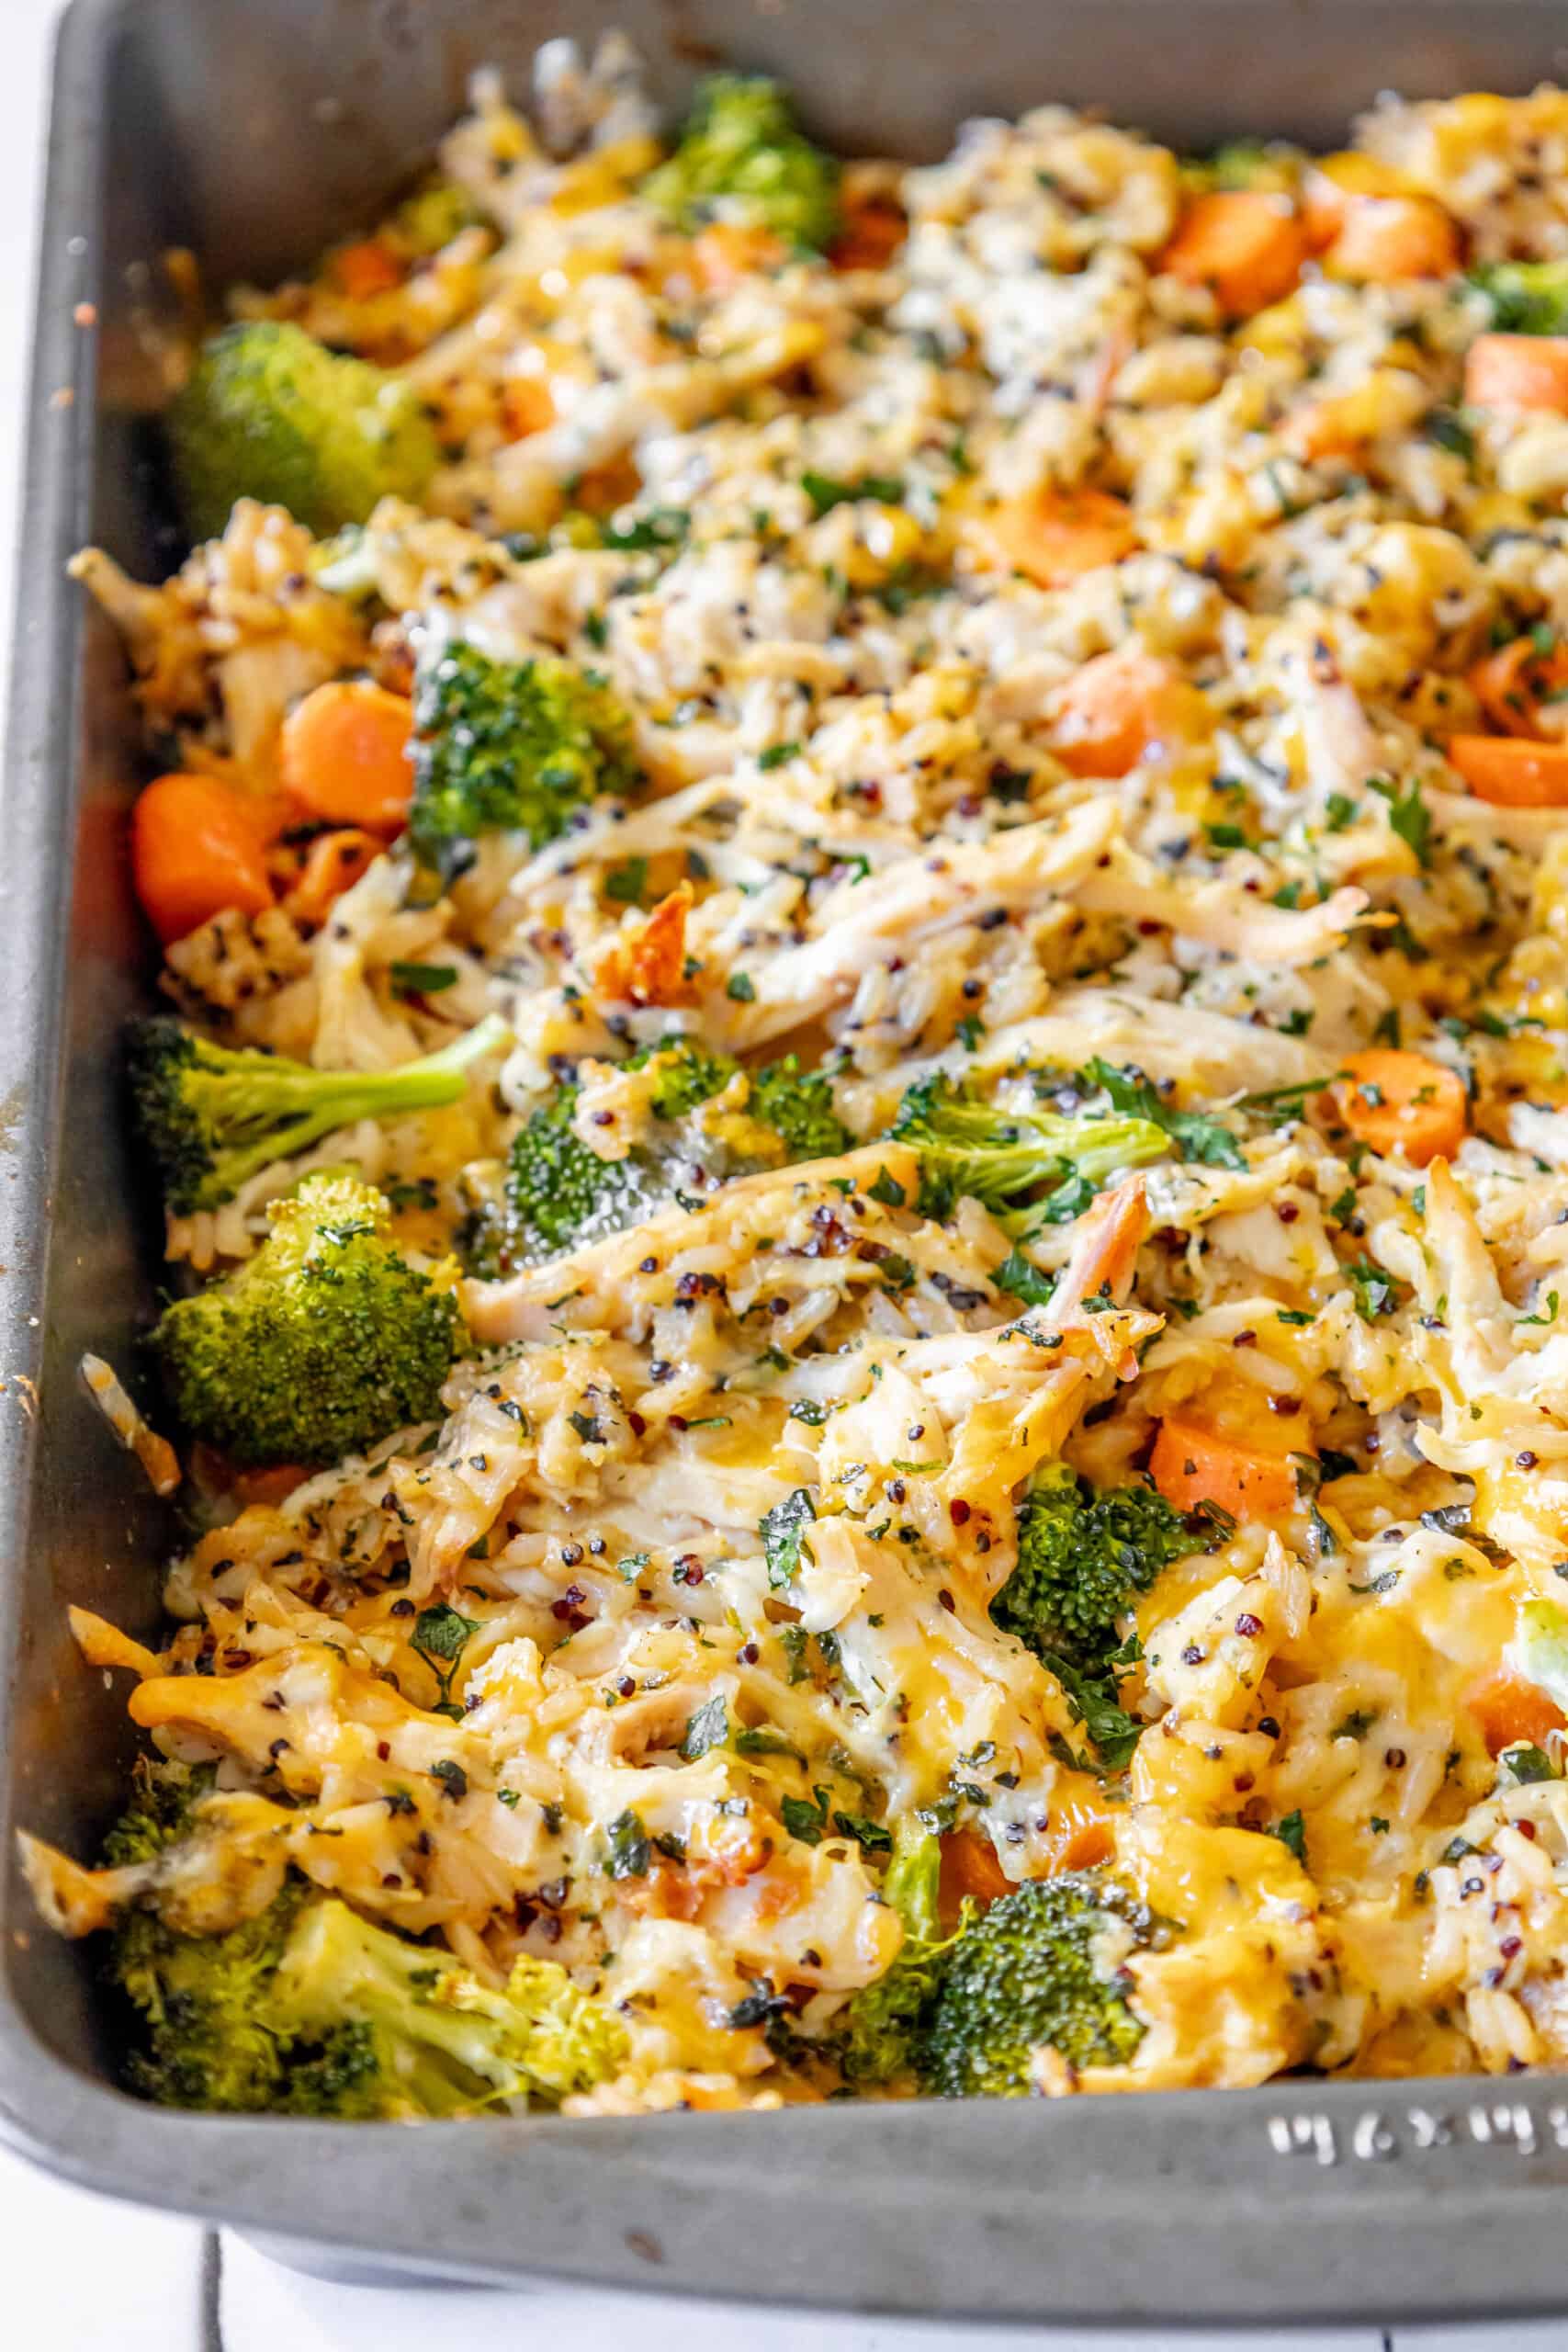 A cheesy casserole dish with broccoli, carrots, and rice.